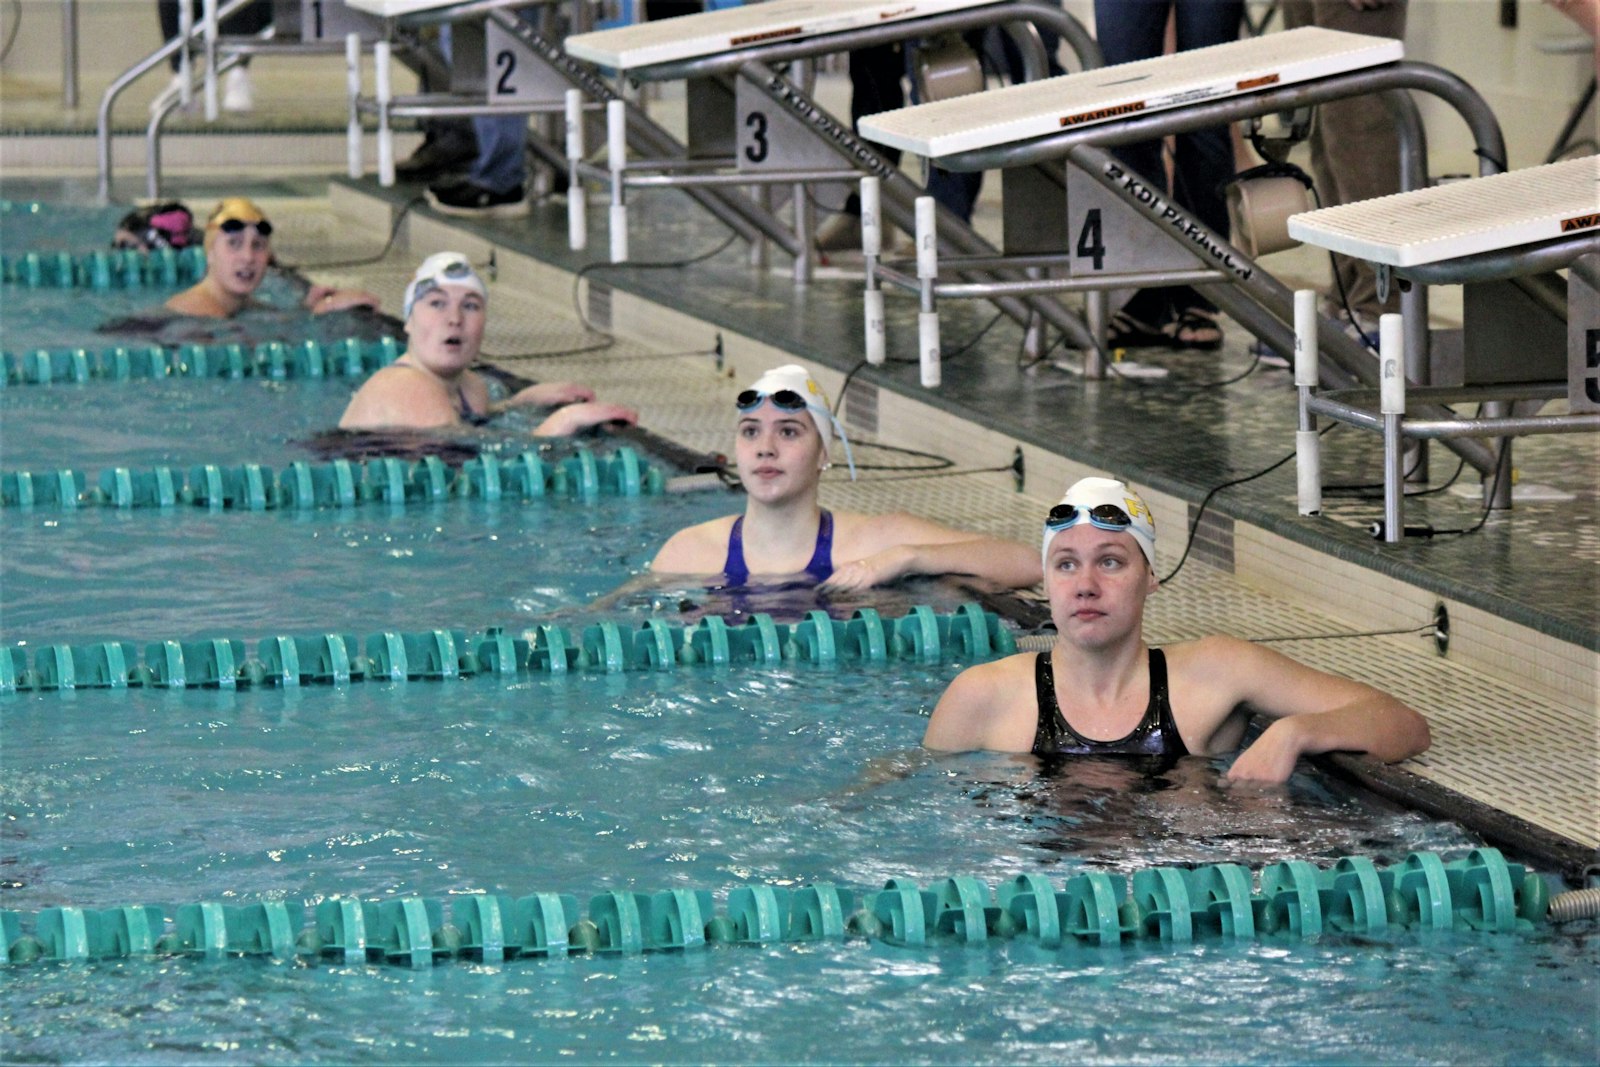 Bishop Foley’s Danielle Tews, and Mercy’s Lily Cochrane, Sydney Derkevorkian and Madeline Basa check their times after completing the 100-yard backstroke. They were the top four swimmers in the event, with Derkevorkian winning in 58.91 seconds.